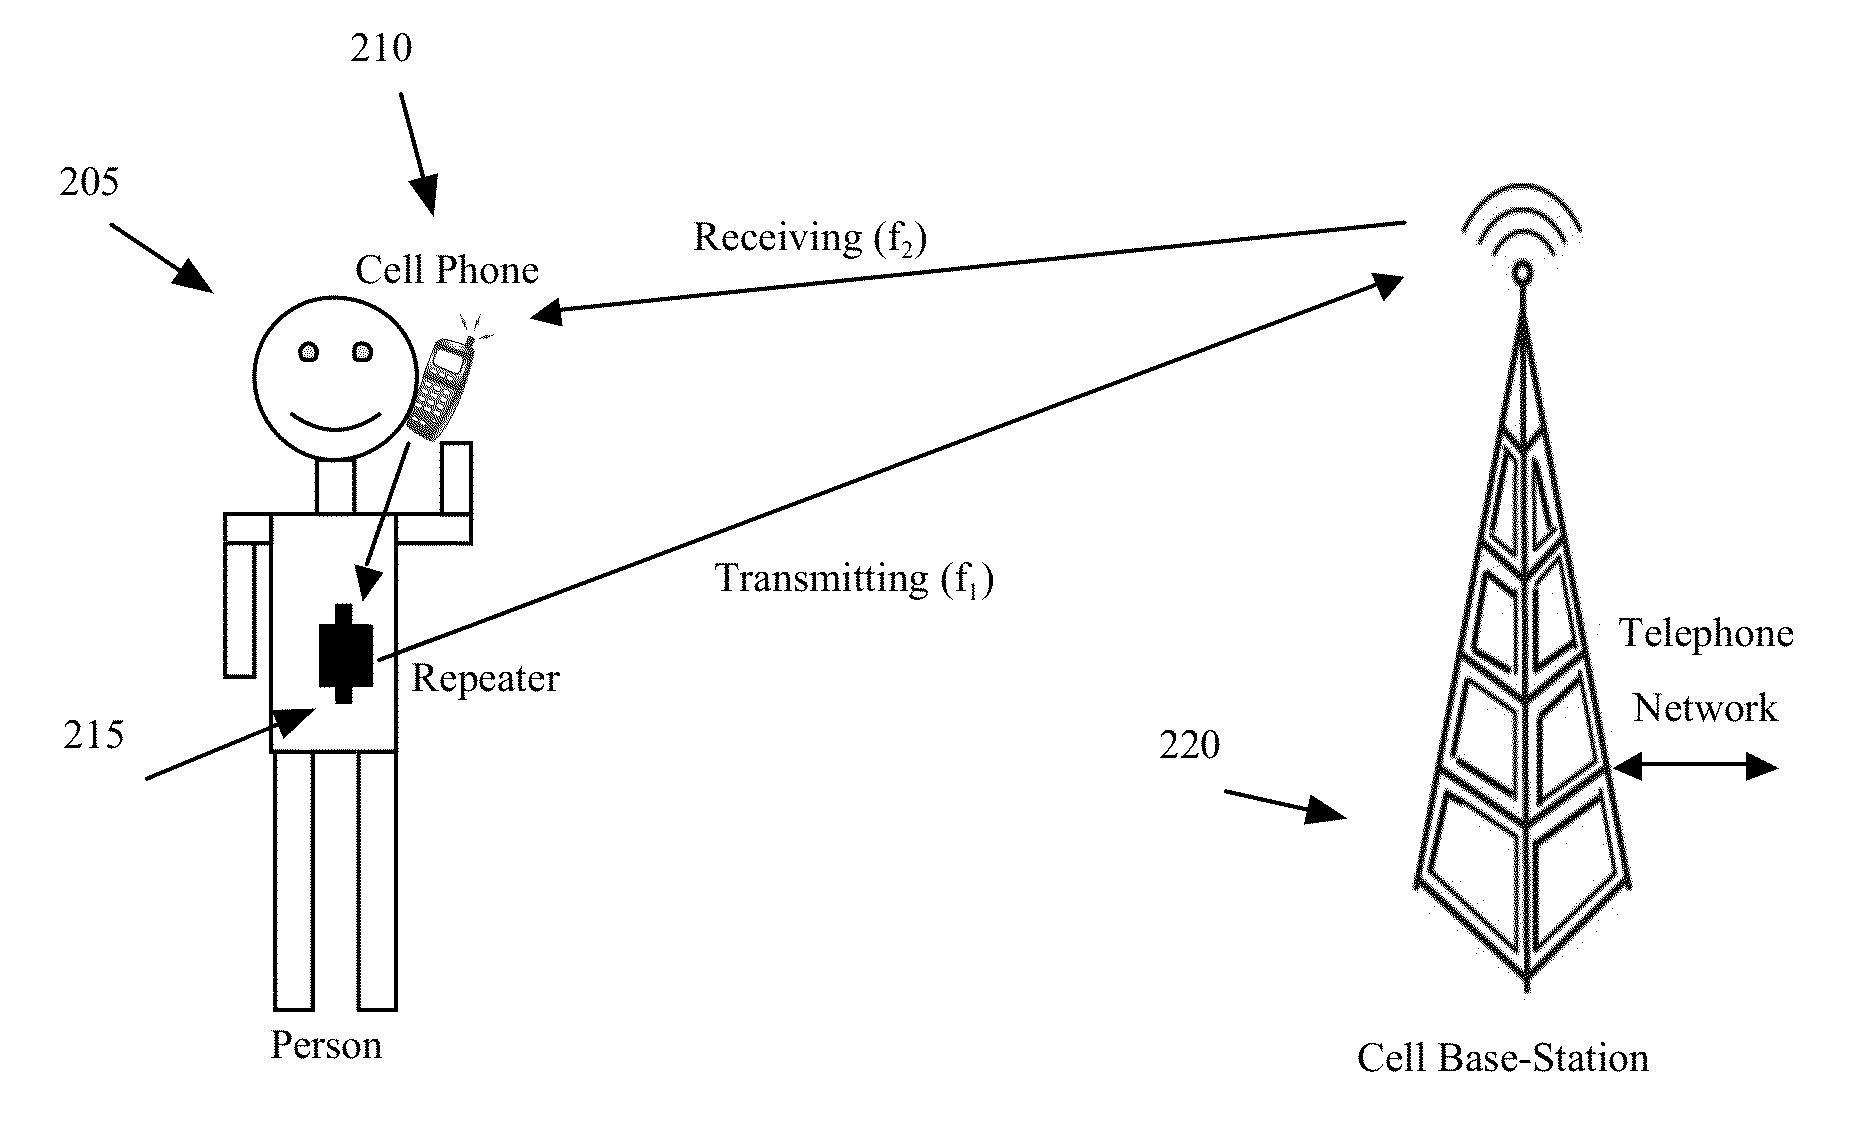 Repeater device for reducing the electromagnetic radiation transmitted from cellular phone antennas and extending phone battery life